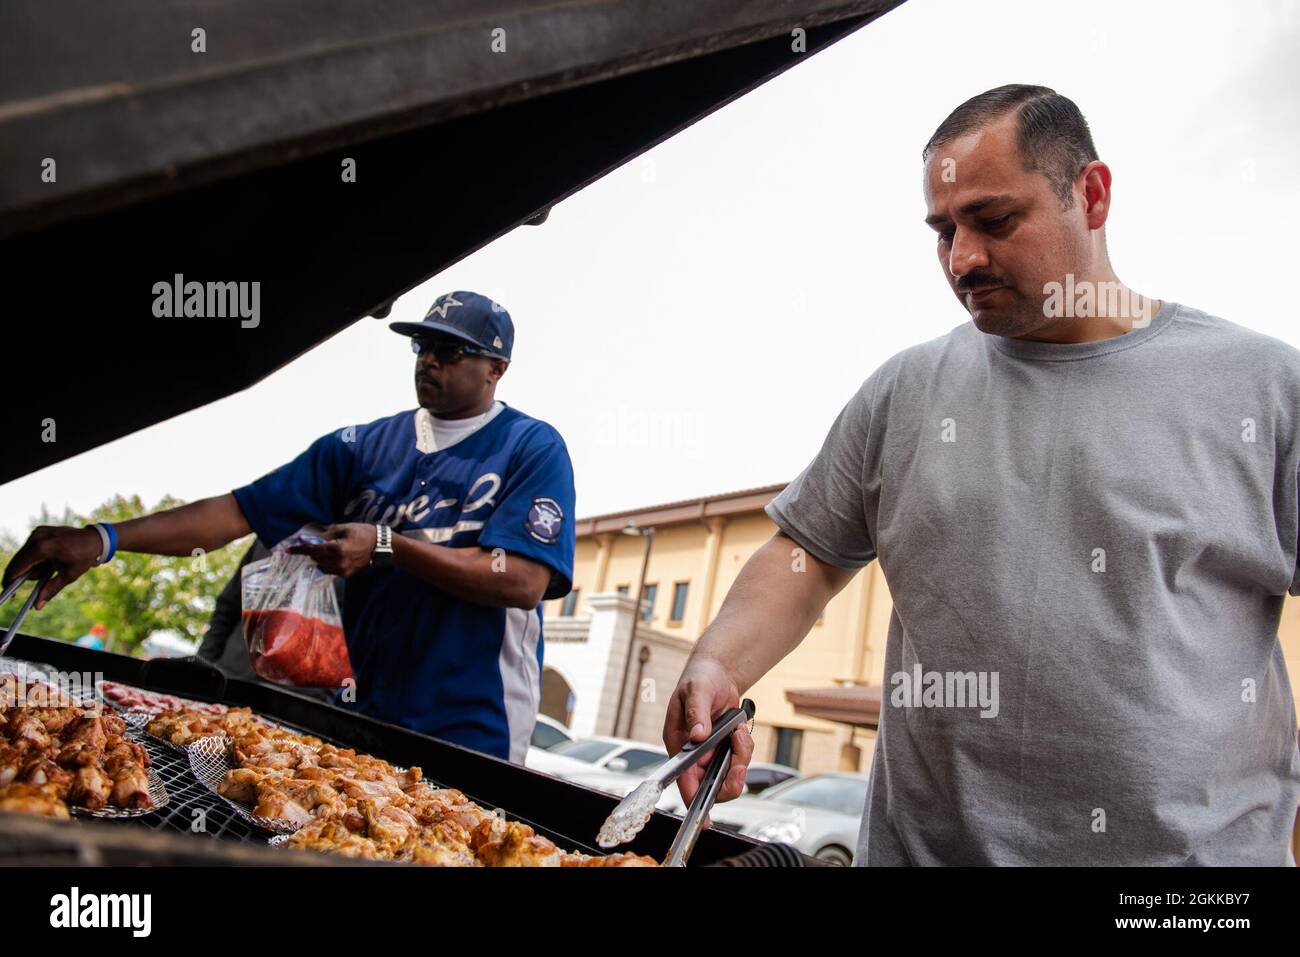 Tech. Sgt. Joe Perkins, 51st Security Forces Squadron contingency operations section chief, left, and Master Sgt. Alejandrino Herrera, 51st SFS commander support staff superintendent, prepares food for the Police Week Morale Cookout at Osan Air Base, Republic of Korea, May 13, 2021. The cookout was open to all base personnel and host nationals, and finished off the week full of events with an afternoon of morale building and relaxation. Stock Photo